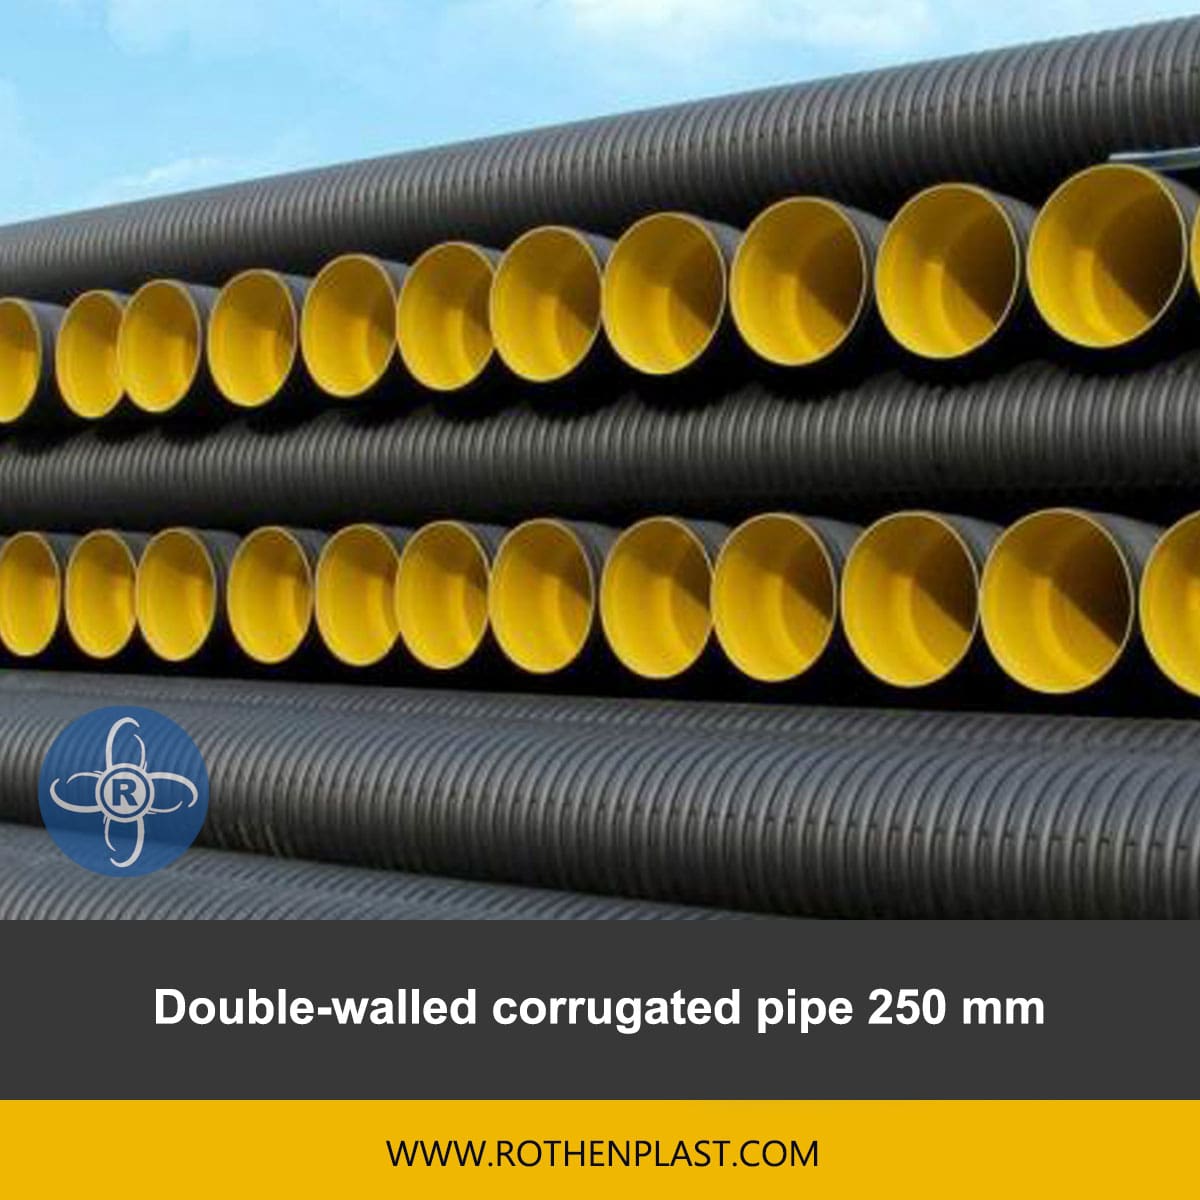 Double walled corrugated pipe 250 mm